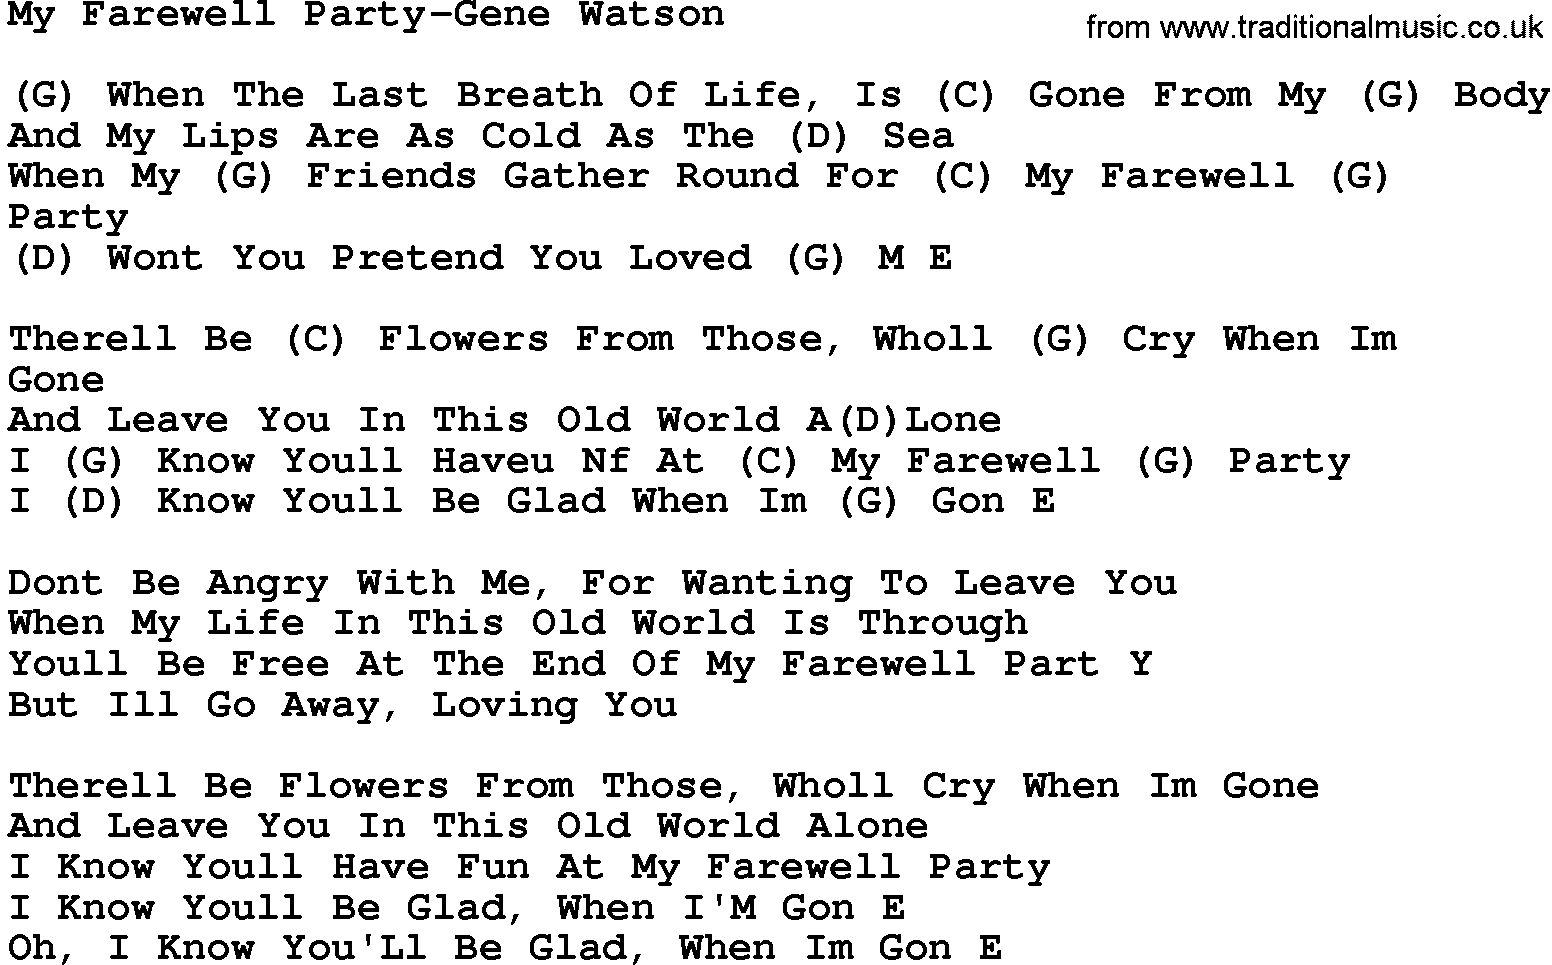 Country music song: My Farewell Party-Gene Watson lyrics and chords